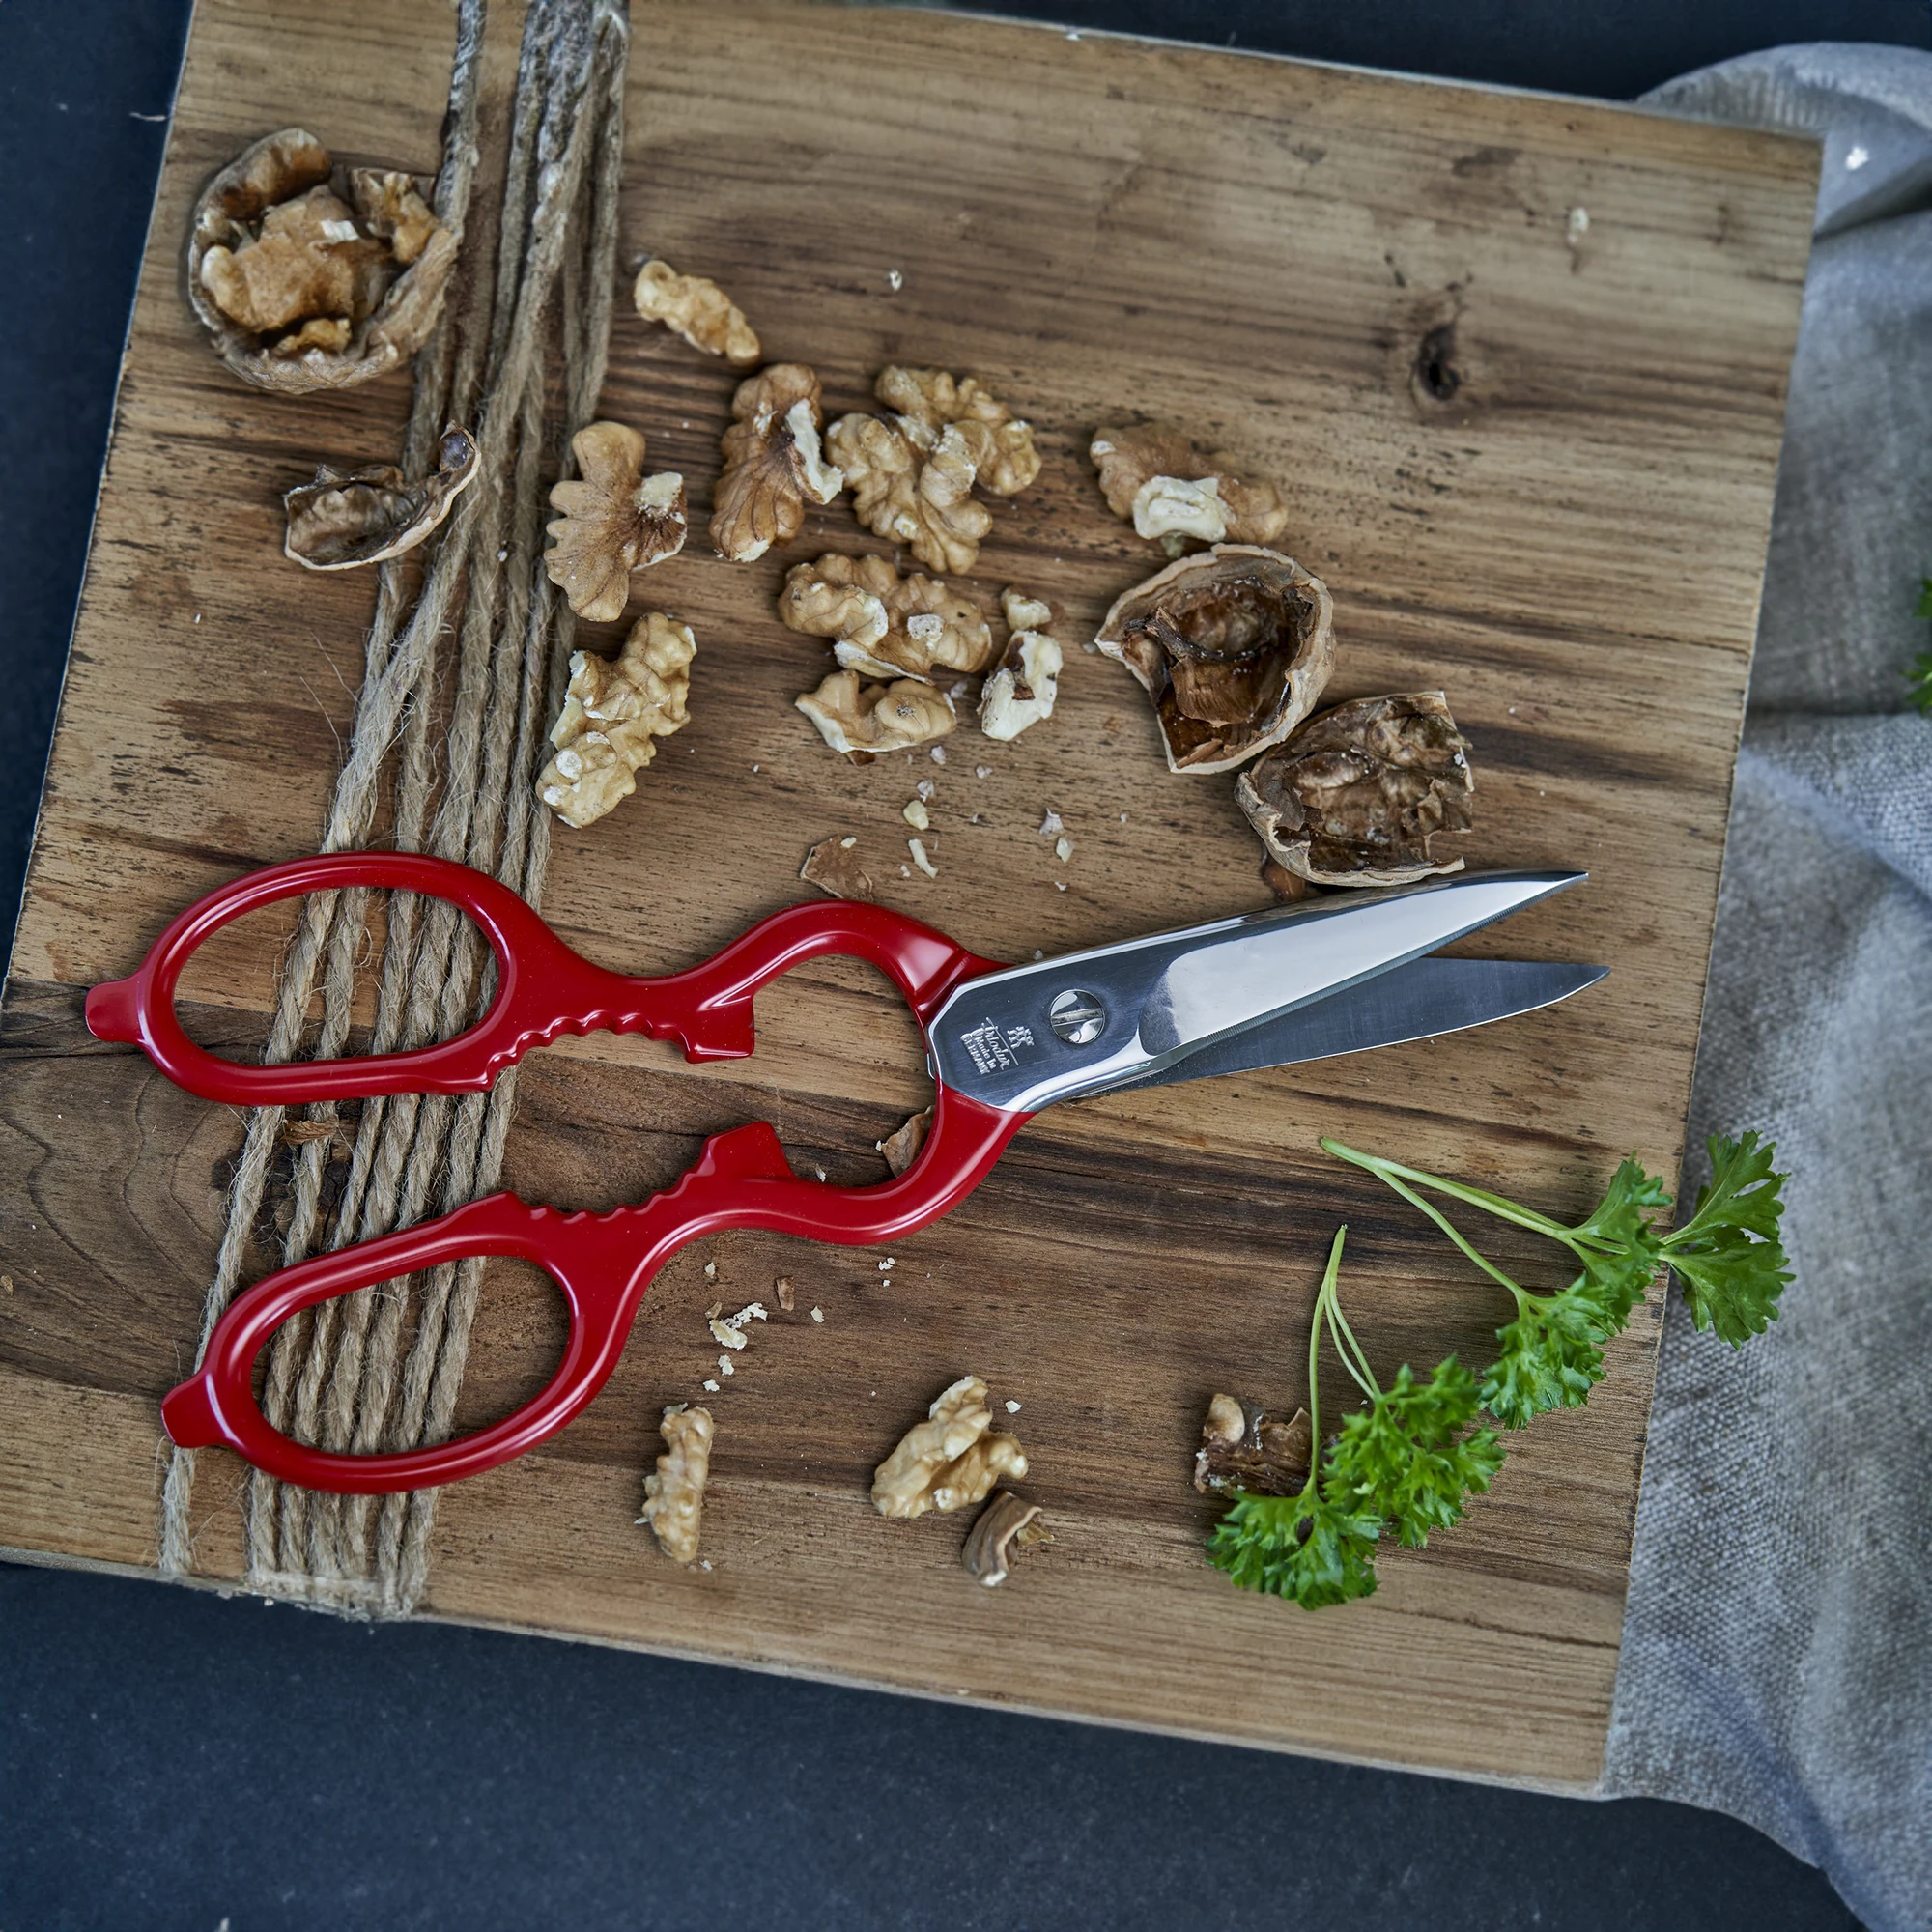 https://www.homethreads.com/files/zwilling/1005709-zwilling-forged-multi-purpose-kitchen-shears-red-handle-5.webp